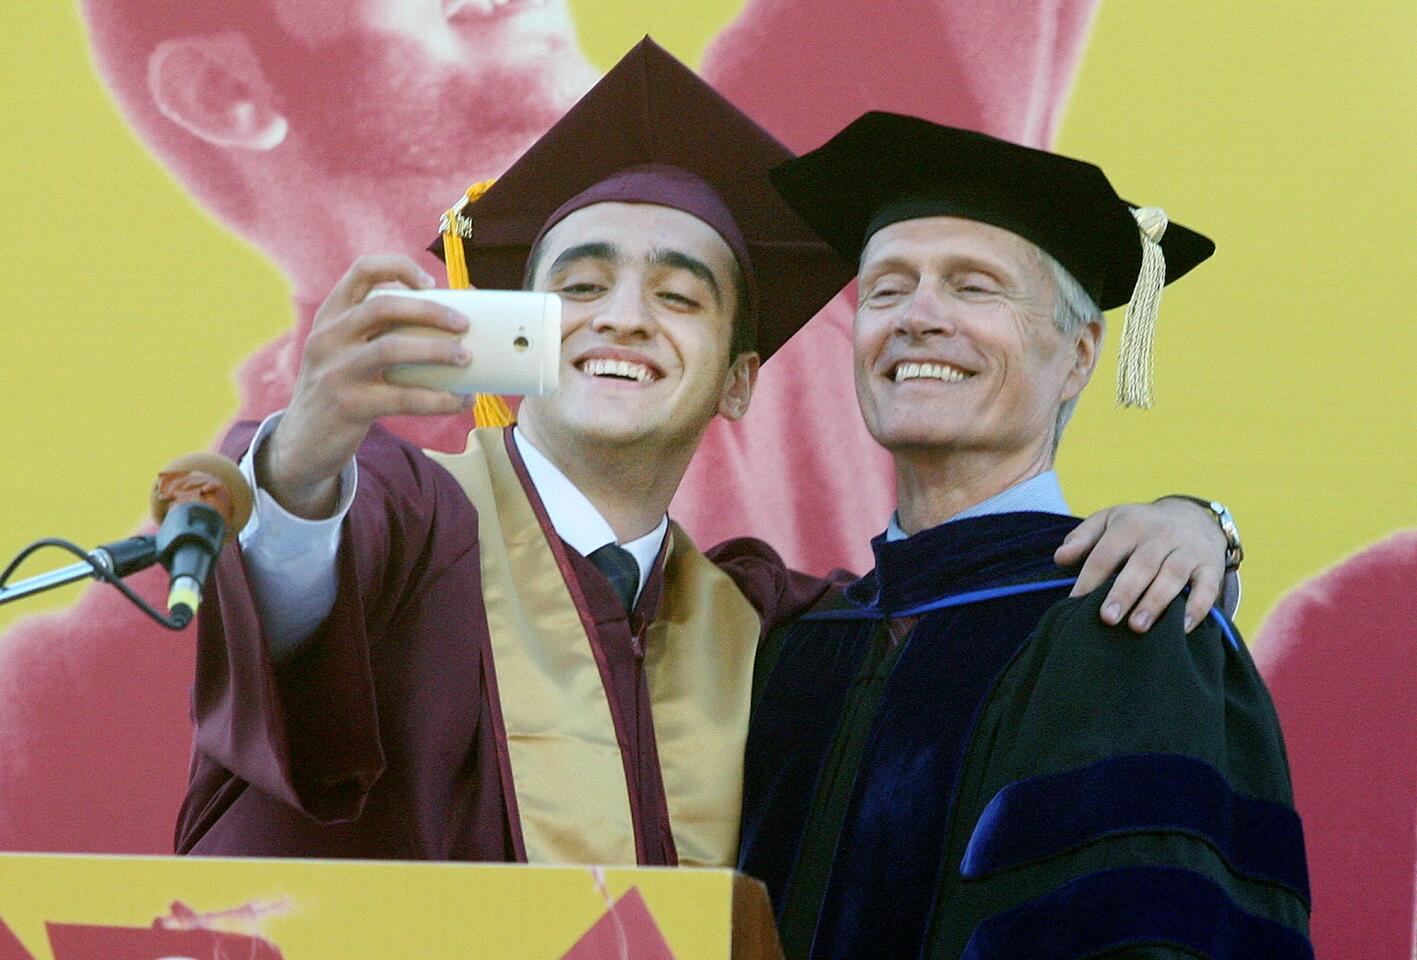 ASGCC President Davit Avagyan takes a seflie for Facebook with school Superintendent and President Dr. David Viar at the graduation of Glendale College on Wednesday, June 11, 2014.